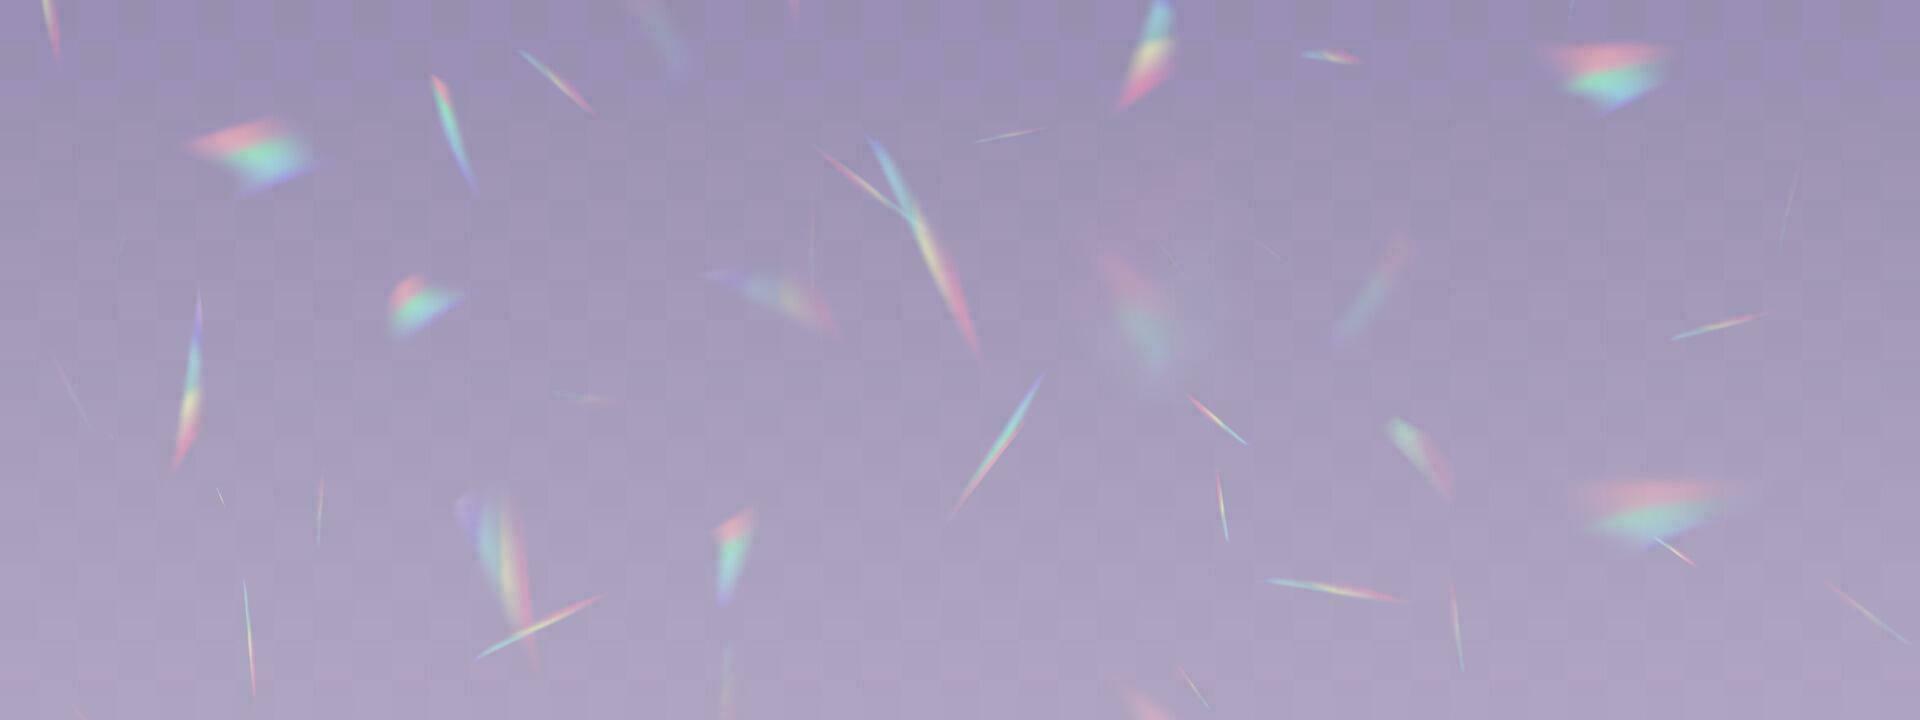 Blurred rainbow refraction overlay effect. Light lens prism effect. Holographic reflection, crystal flare leak shadow overlay. Vector abstract illustration.